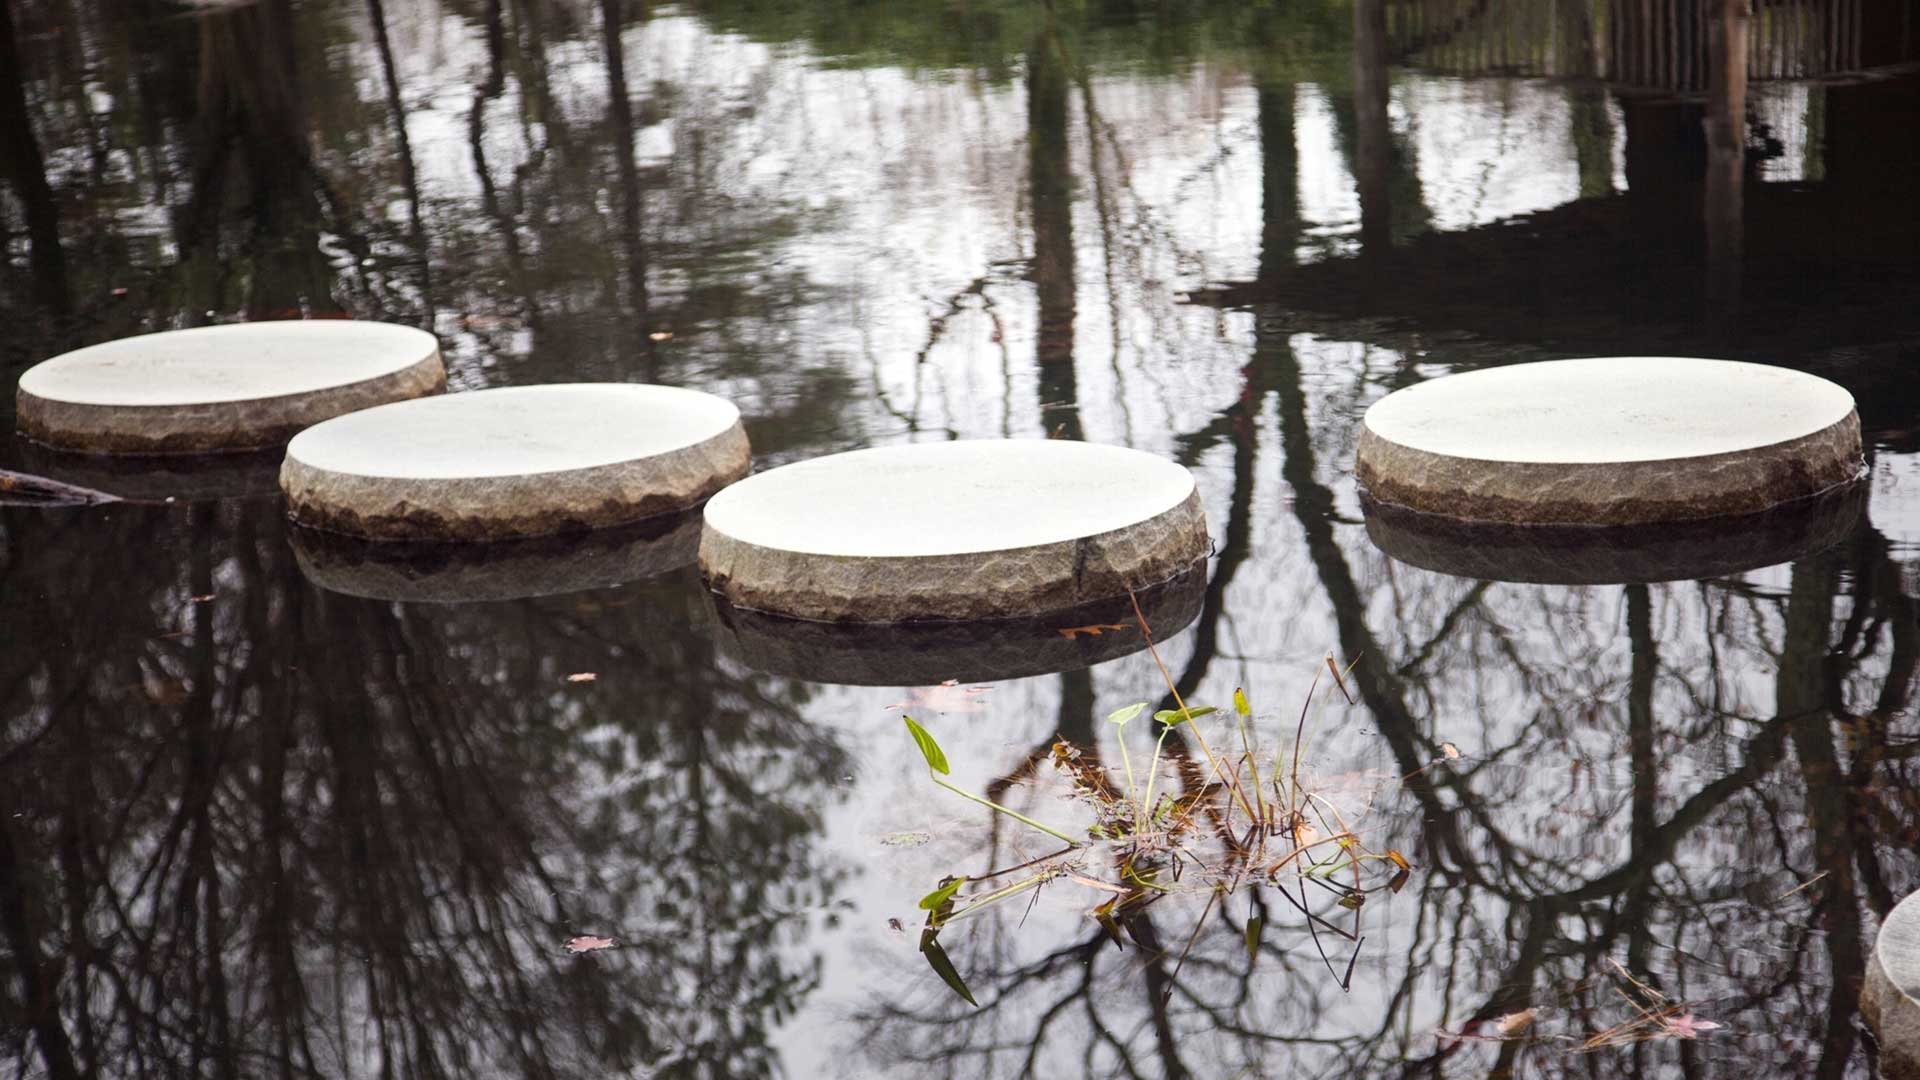 Four stepping stones in a Japanese garden pond